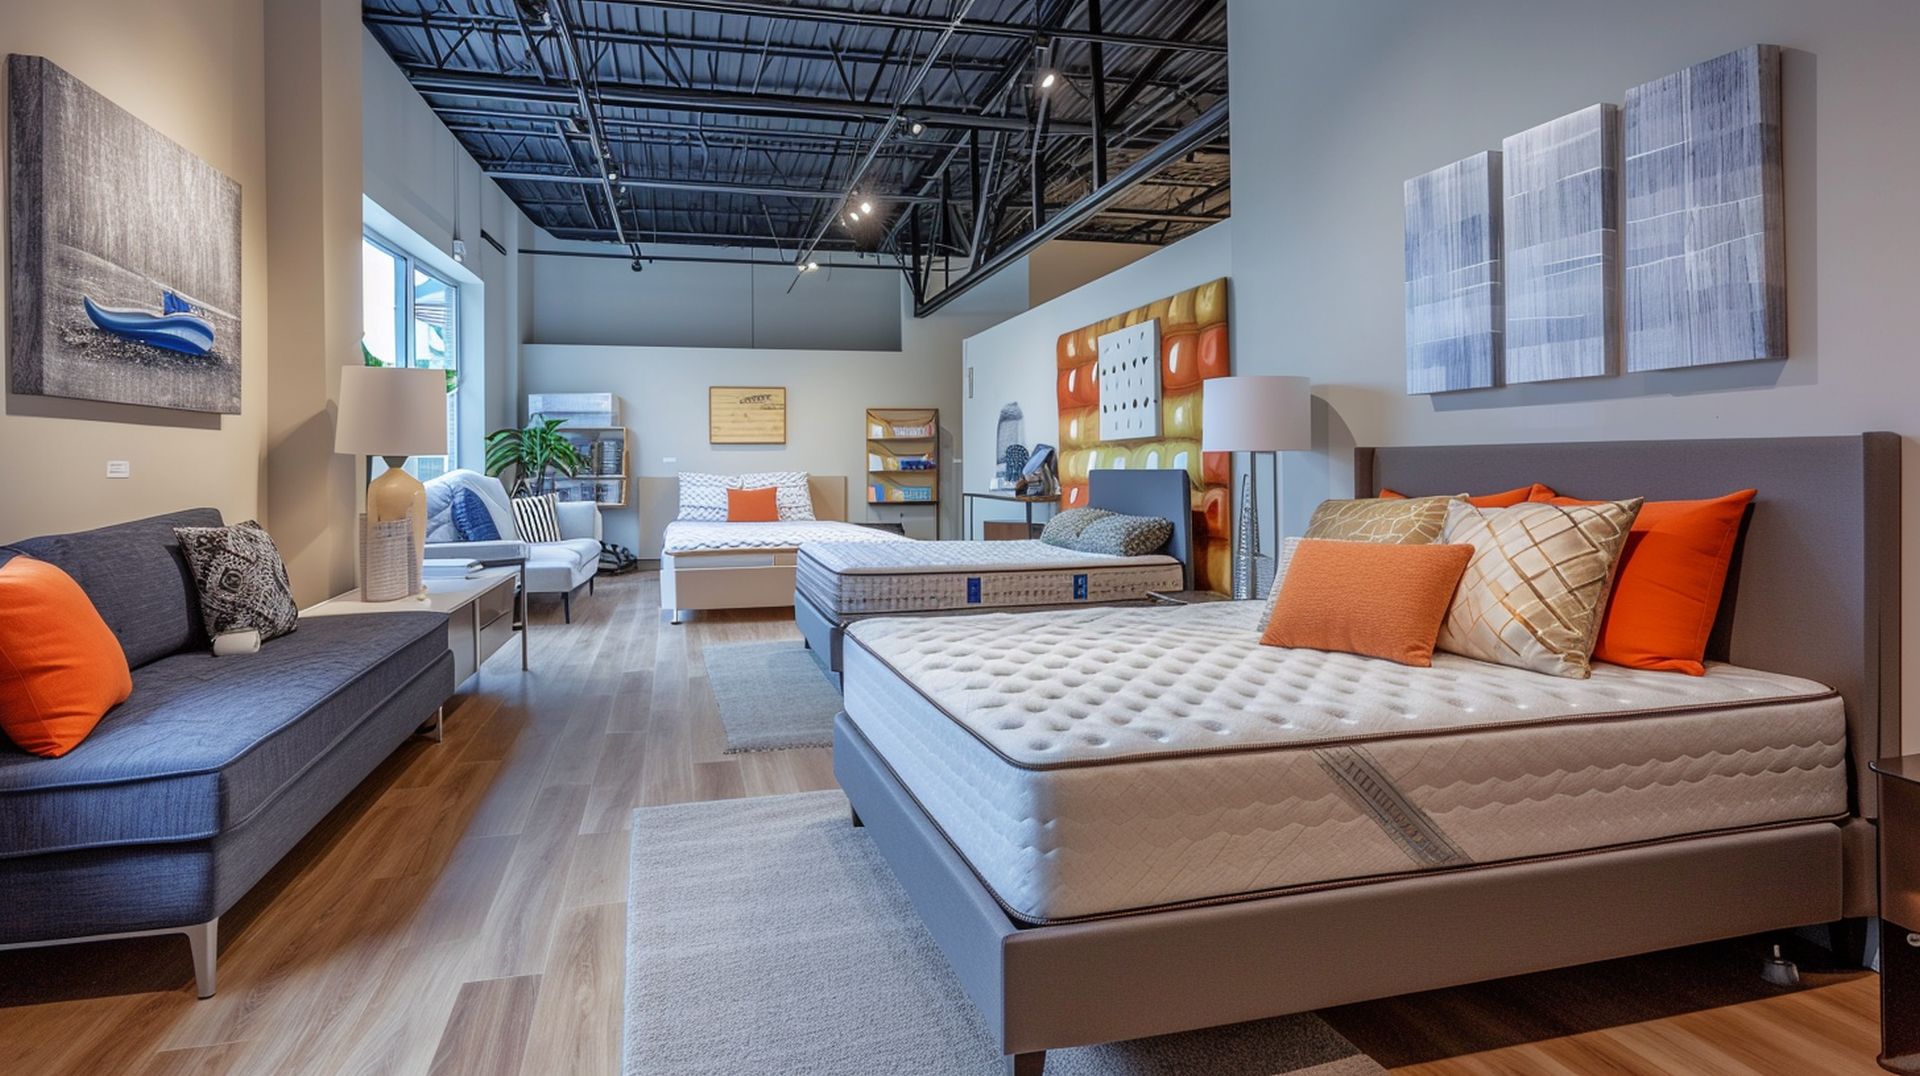 If you're looking for a new bed, mattress stores in Redondo Beach offer the best customer and delivery service, financing, and warranties in California